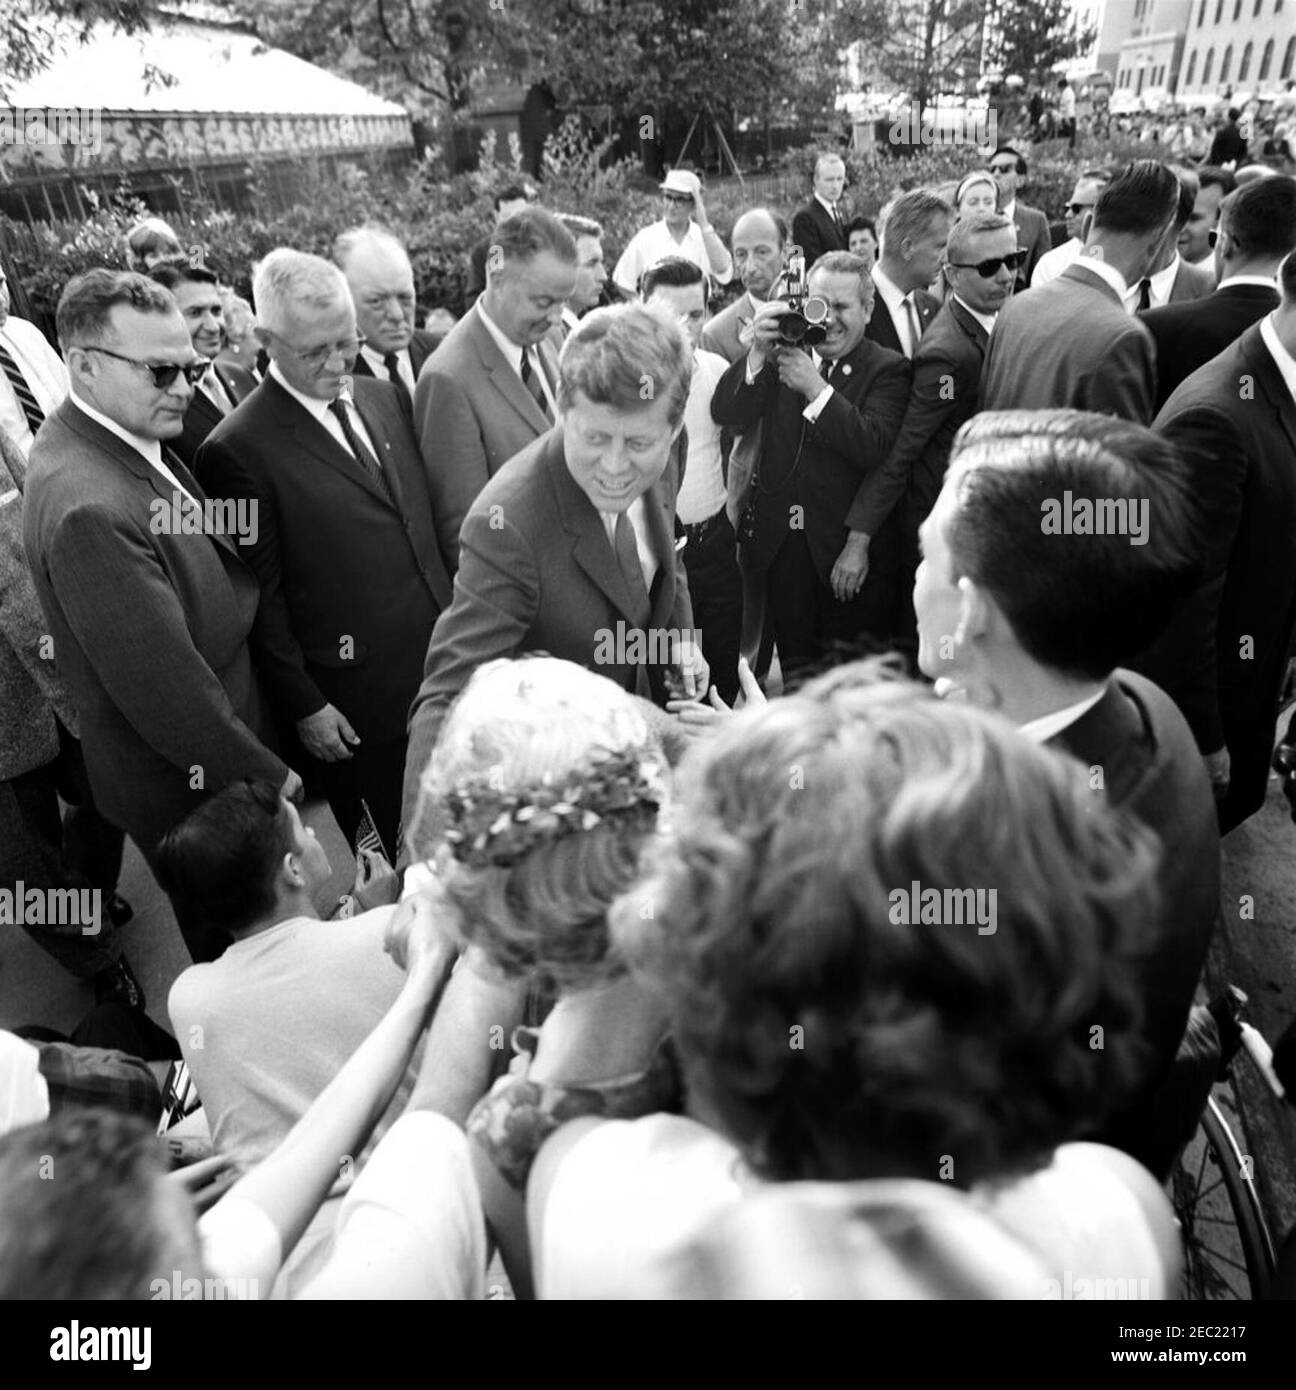 Trip to New York and Connecticut: New York City, President John F. Kennedy Visits with Patients at the Institute of Physical Medicine and Rehabilitation, New York University Medical Center, 5:45PM. President John F. Kennedy greets patients after visiting his father, Ambassador Joseph P. Kennedy, Sr., at the Institute of Physical Medicine and Rehabilitation at New York University Medical Center; Founder and Director of the Institute, Dr. Howard A. Rusk, stands behind President Kennedy. Also pictured: White House Secret Service agents, Floyd Boring and Toby Chandler. New York City, New York. [Ph Stock Photo